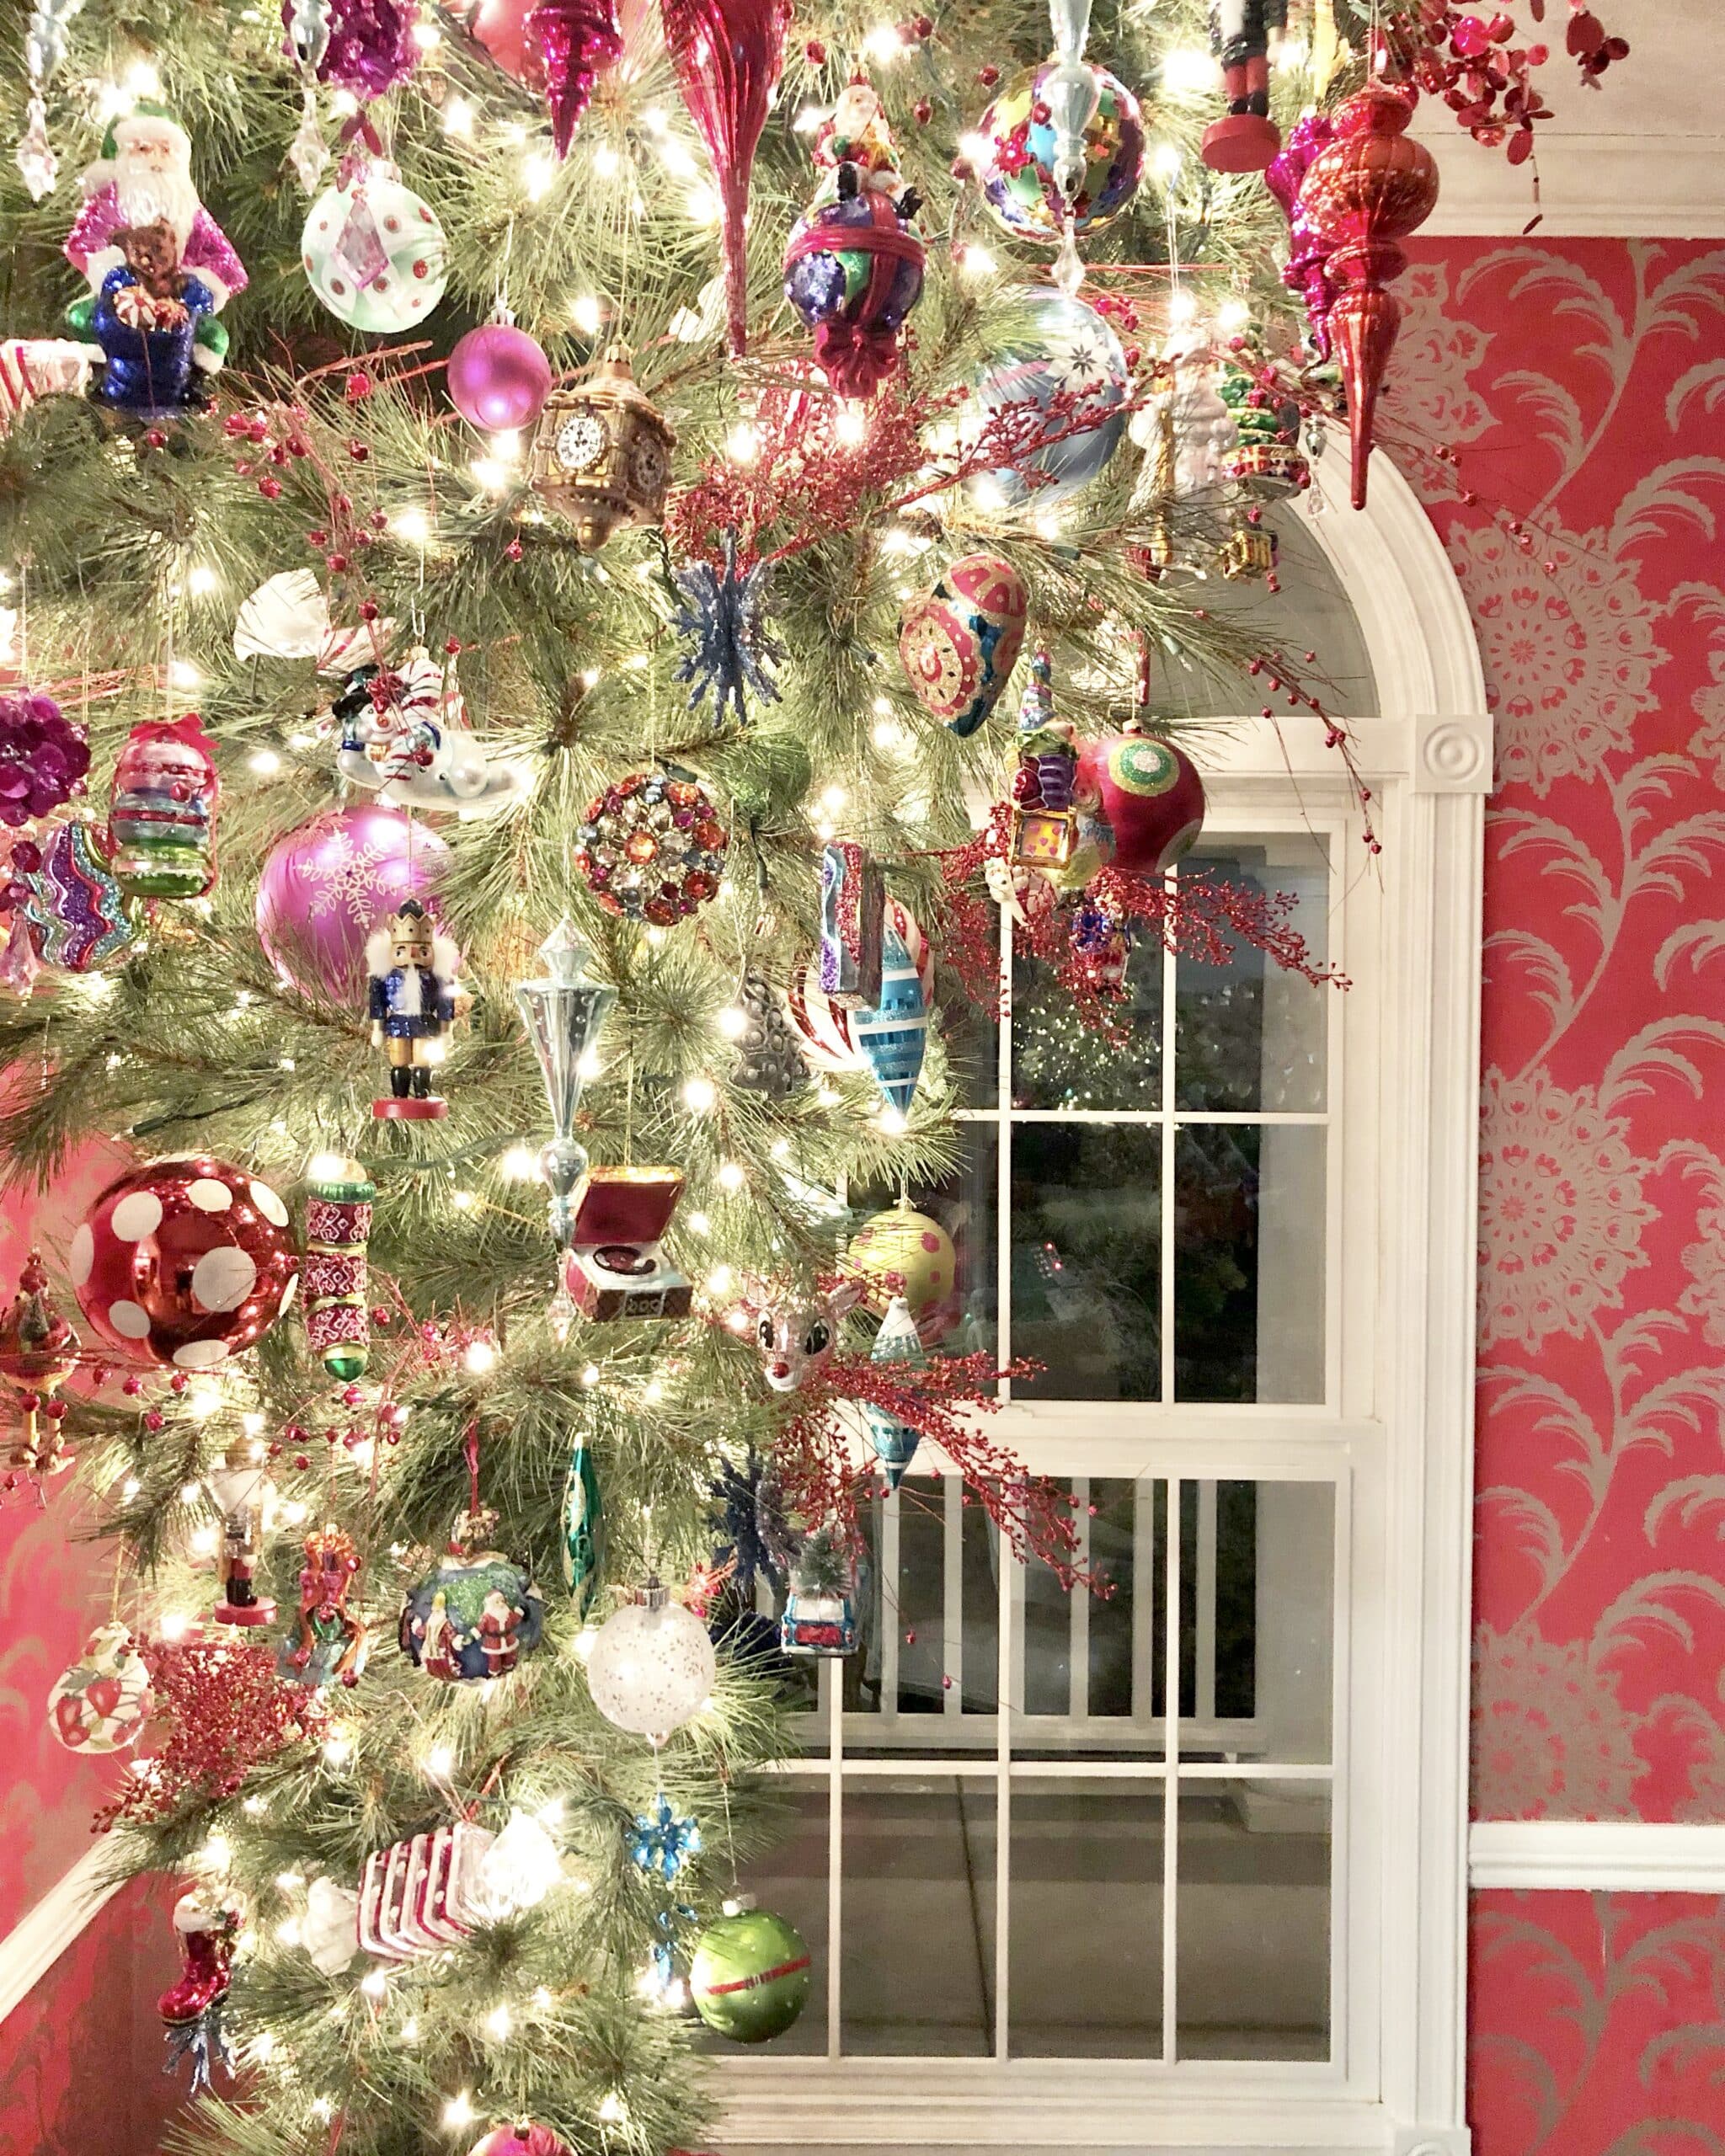 Festive Christmas Tree Decor with a Traditional and Nostalgic Twist